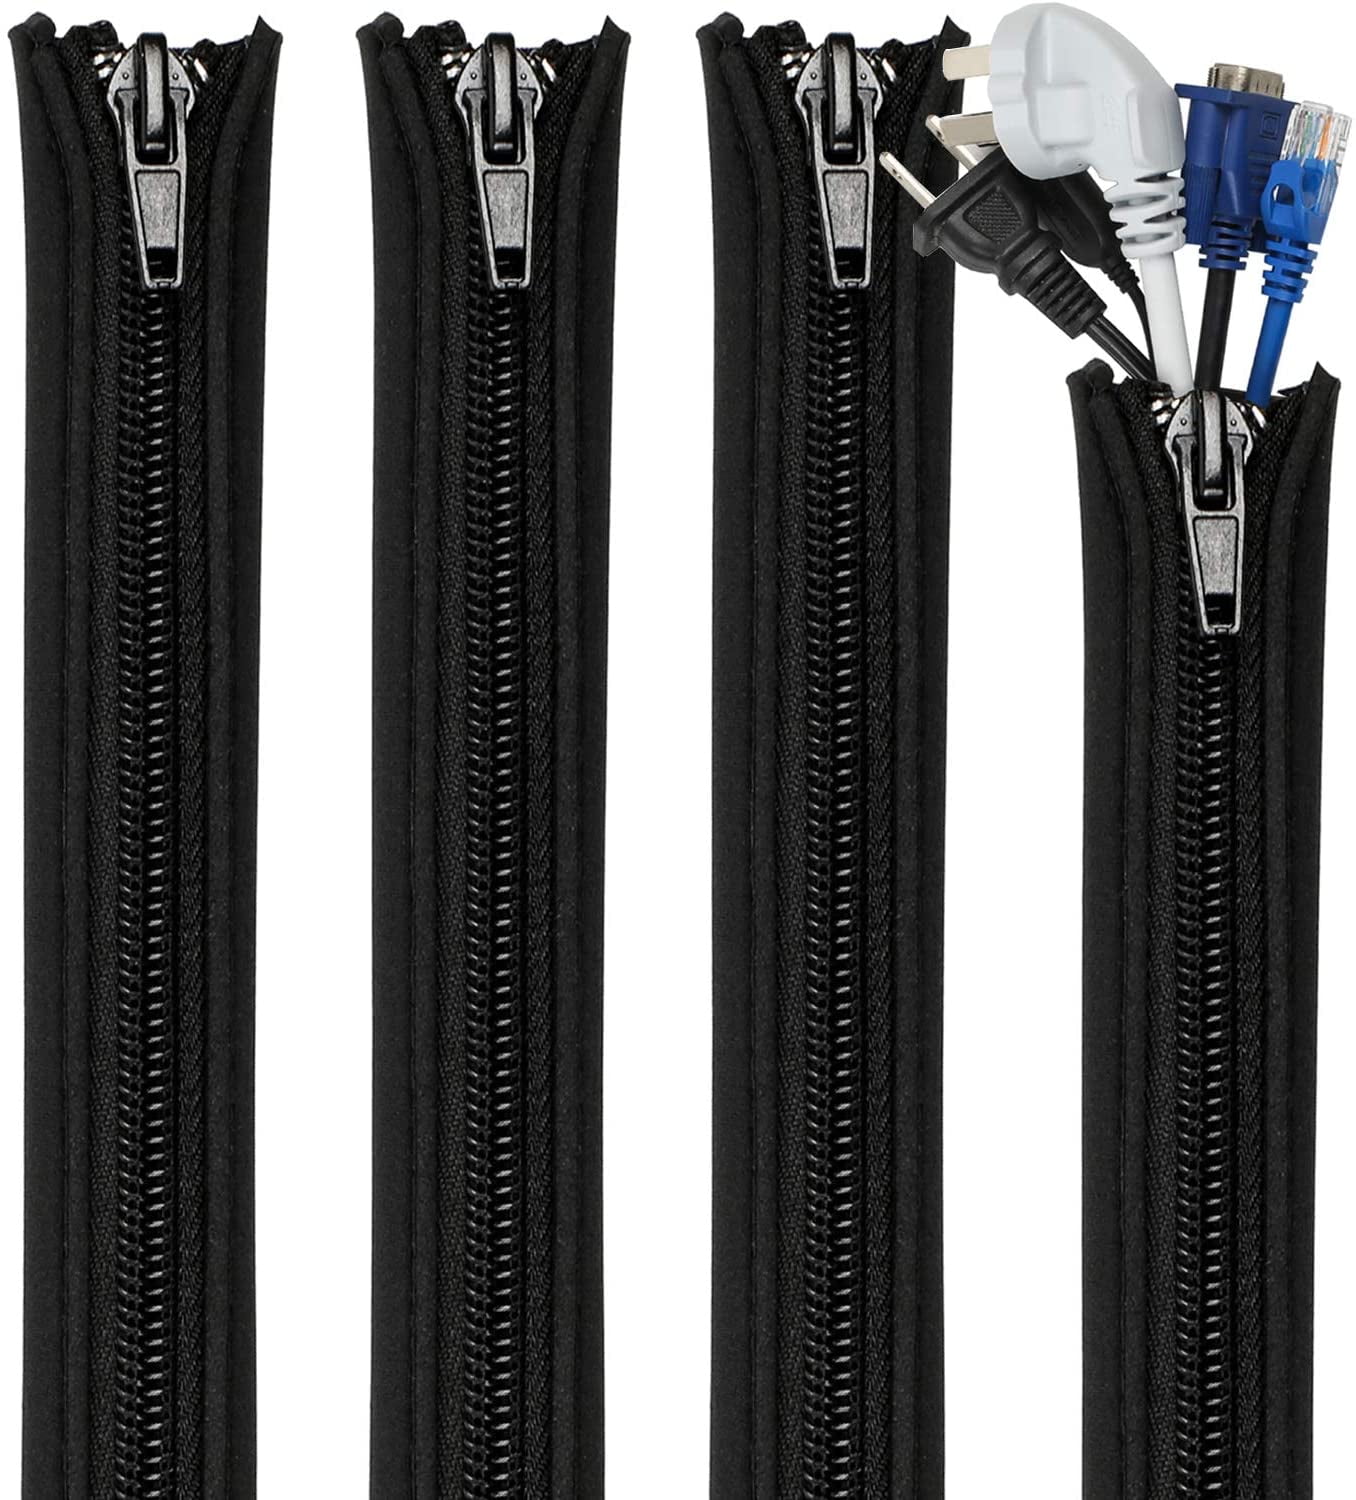 40inch Neoprene Cable Management Sleeve - Cable Routing Solutions, Cables